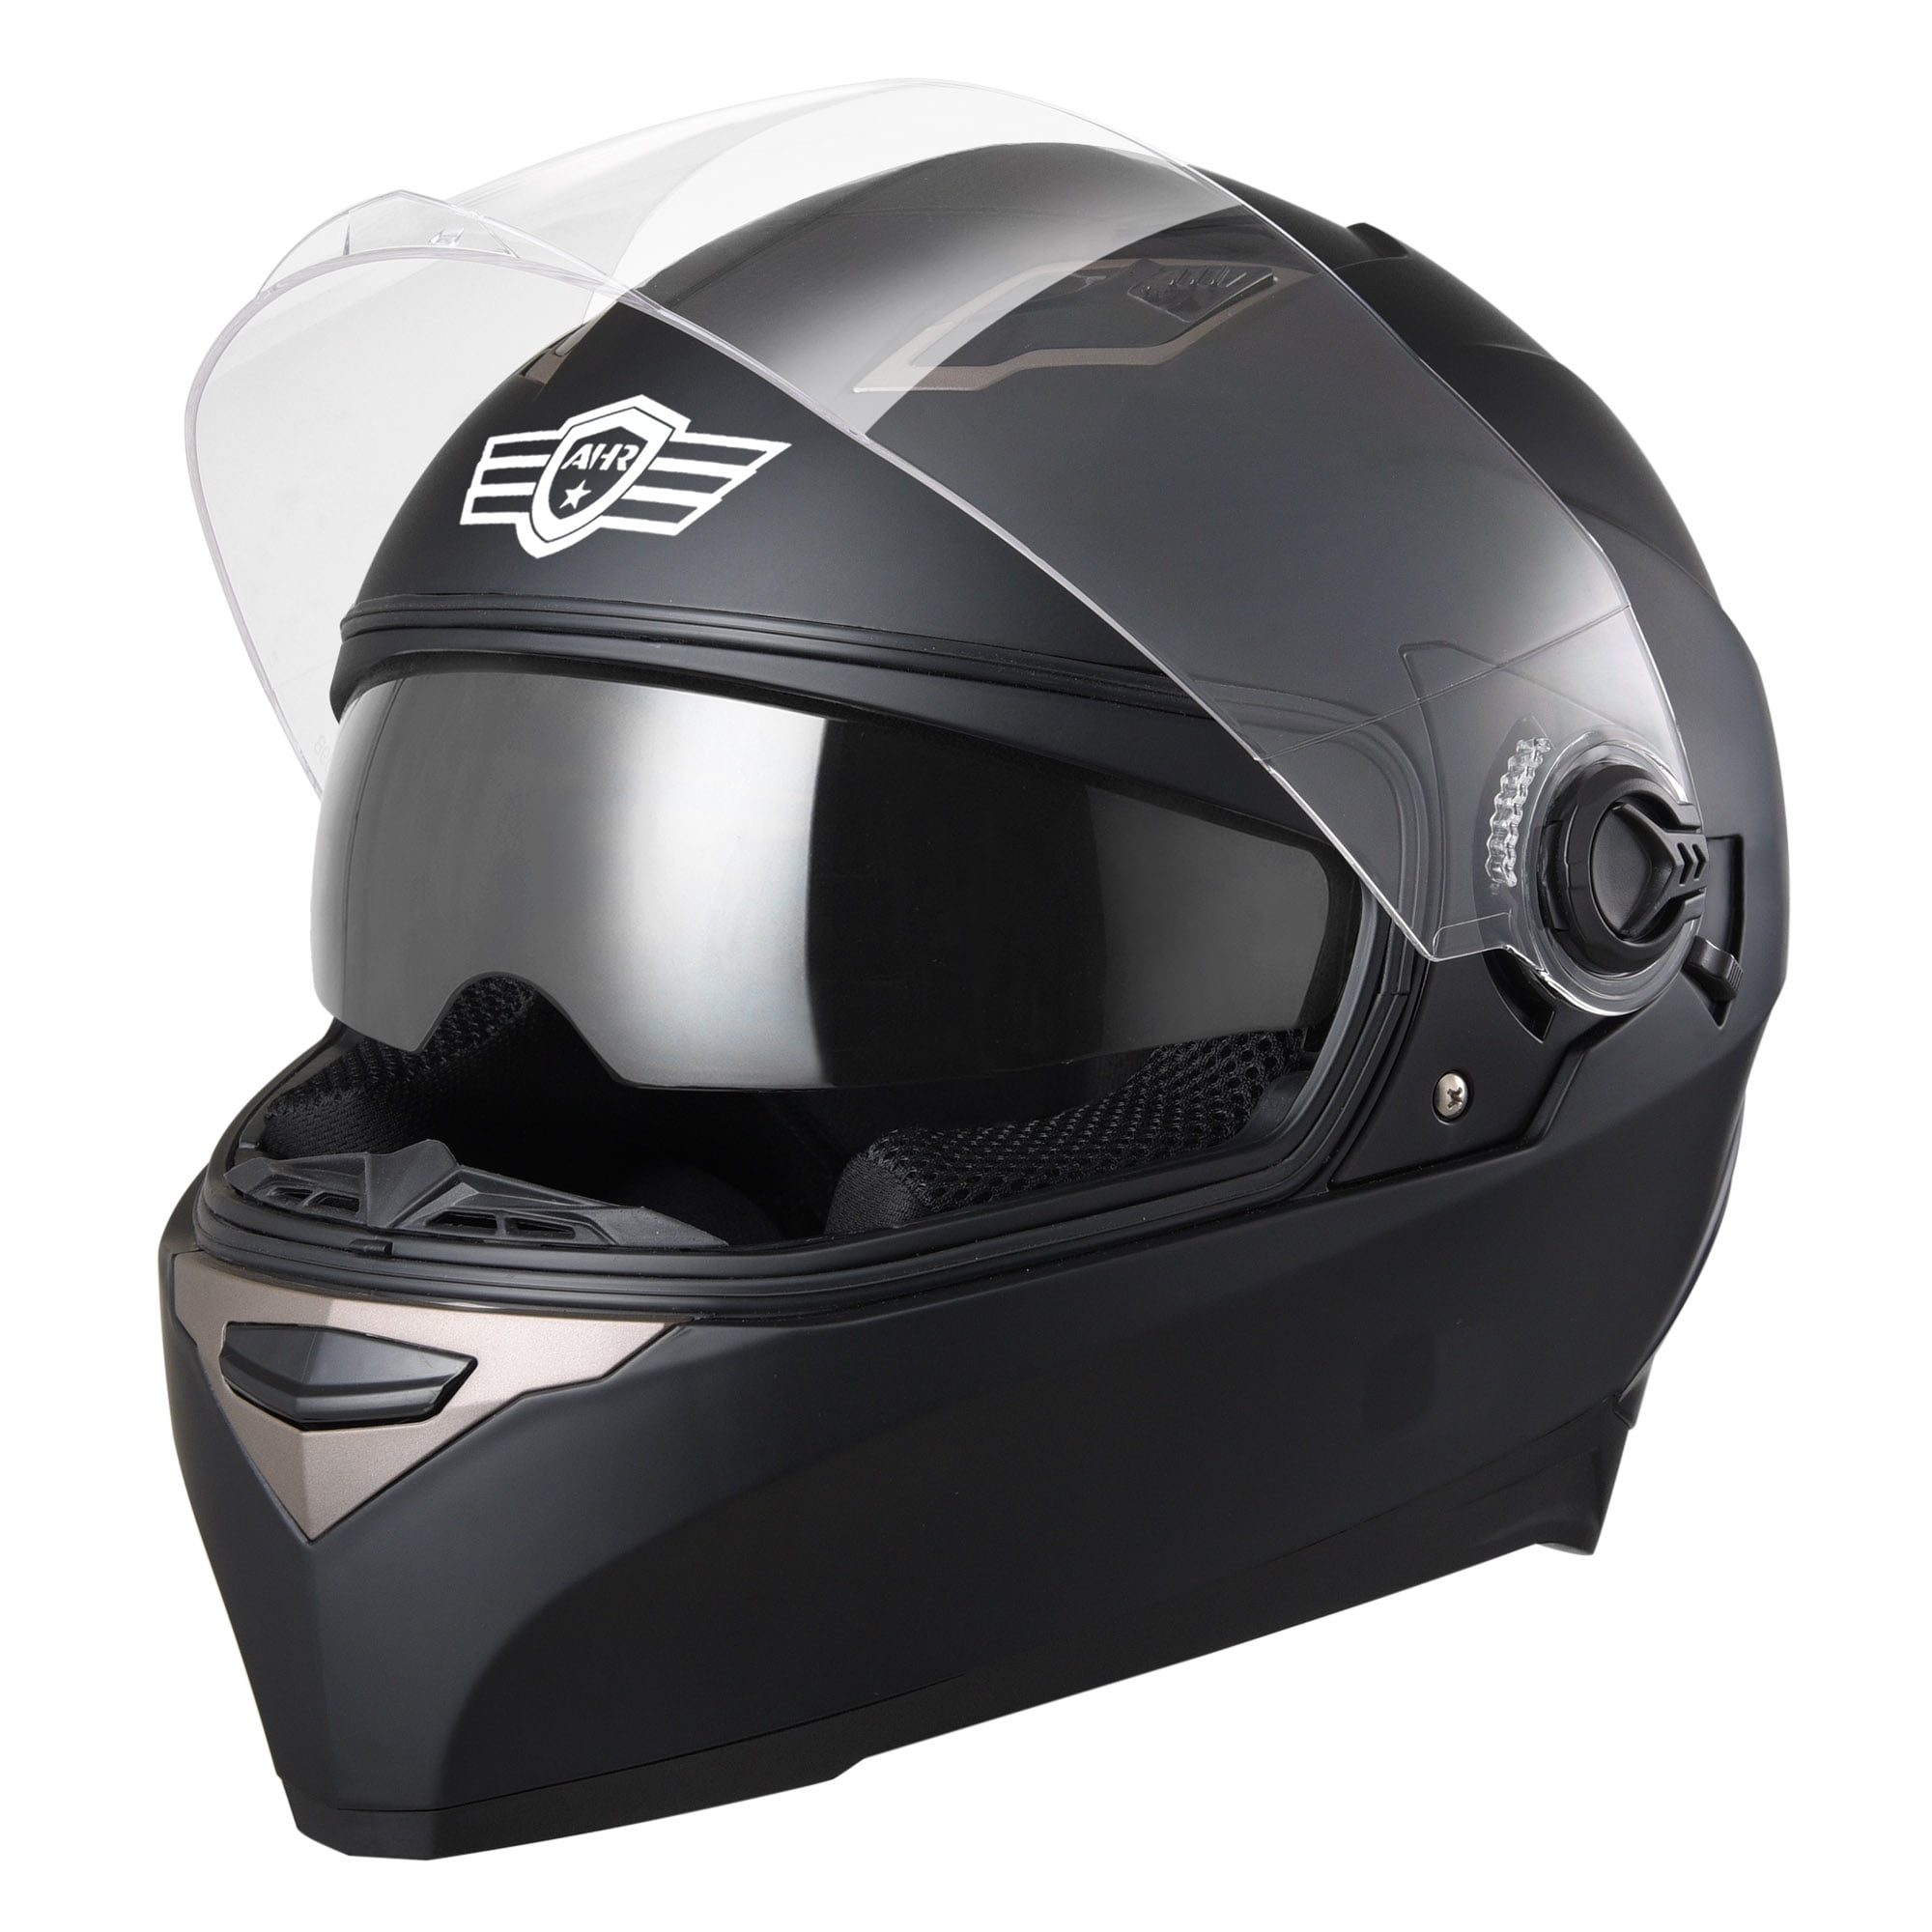 Ridding Helmet GRILL Exclusive POLO HELMET WITH VIZER,FACE GUARD Grill Helmet 